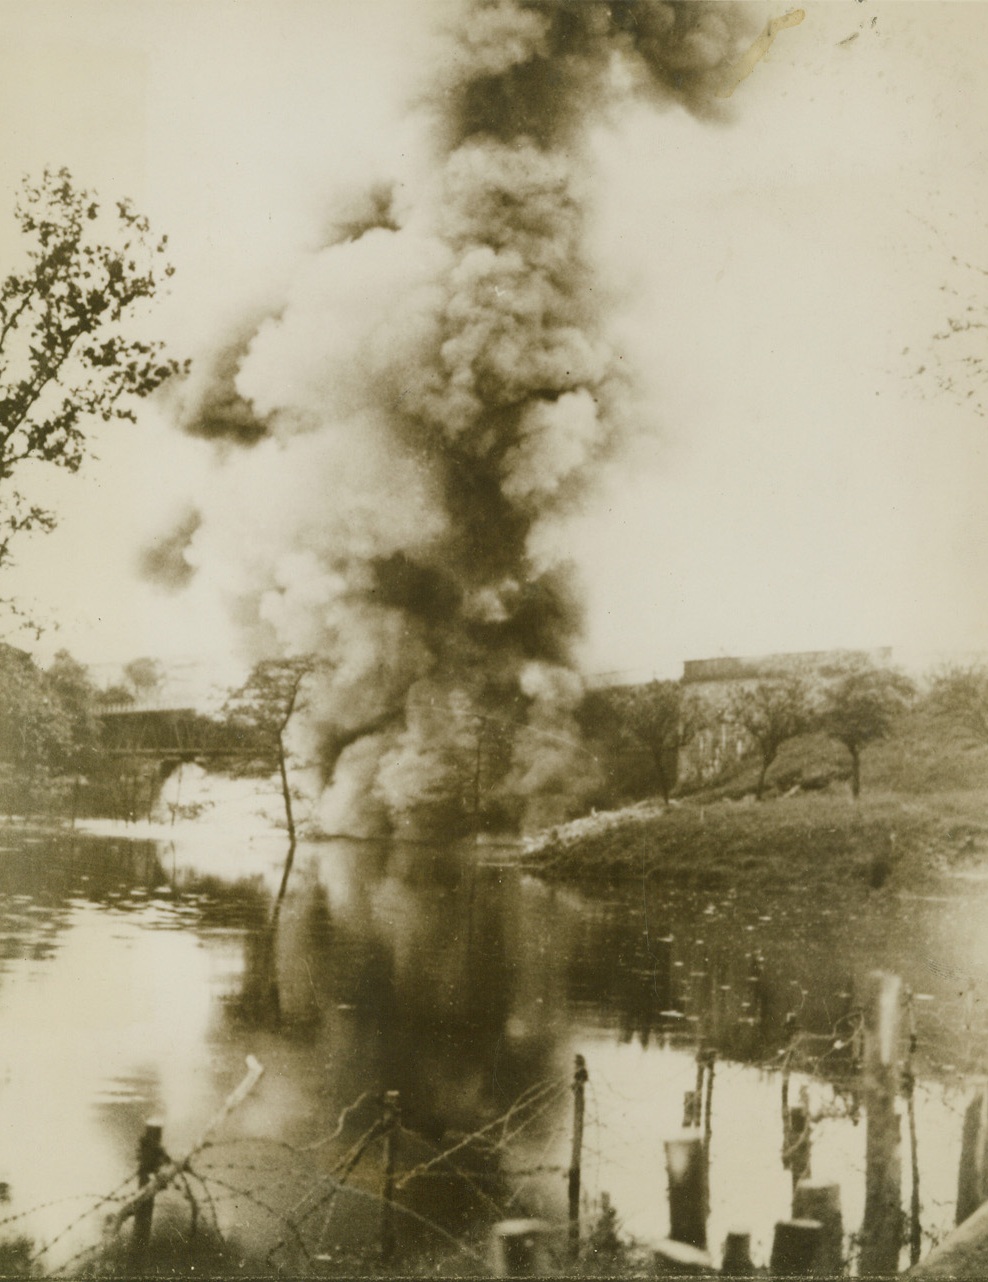 RAILWAY BRIDGE BLASTED TO HALT NAZI ADVANCE, 6/6/1940  FRANCE – A French railway bridge being blasted, presumably in an attempt to impede the German advance during the Battle of Flanders.  (Photo flown to New York by Clipper) Credit: Acme;